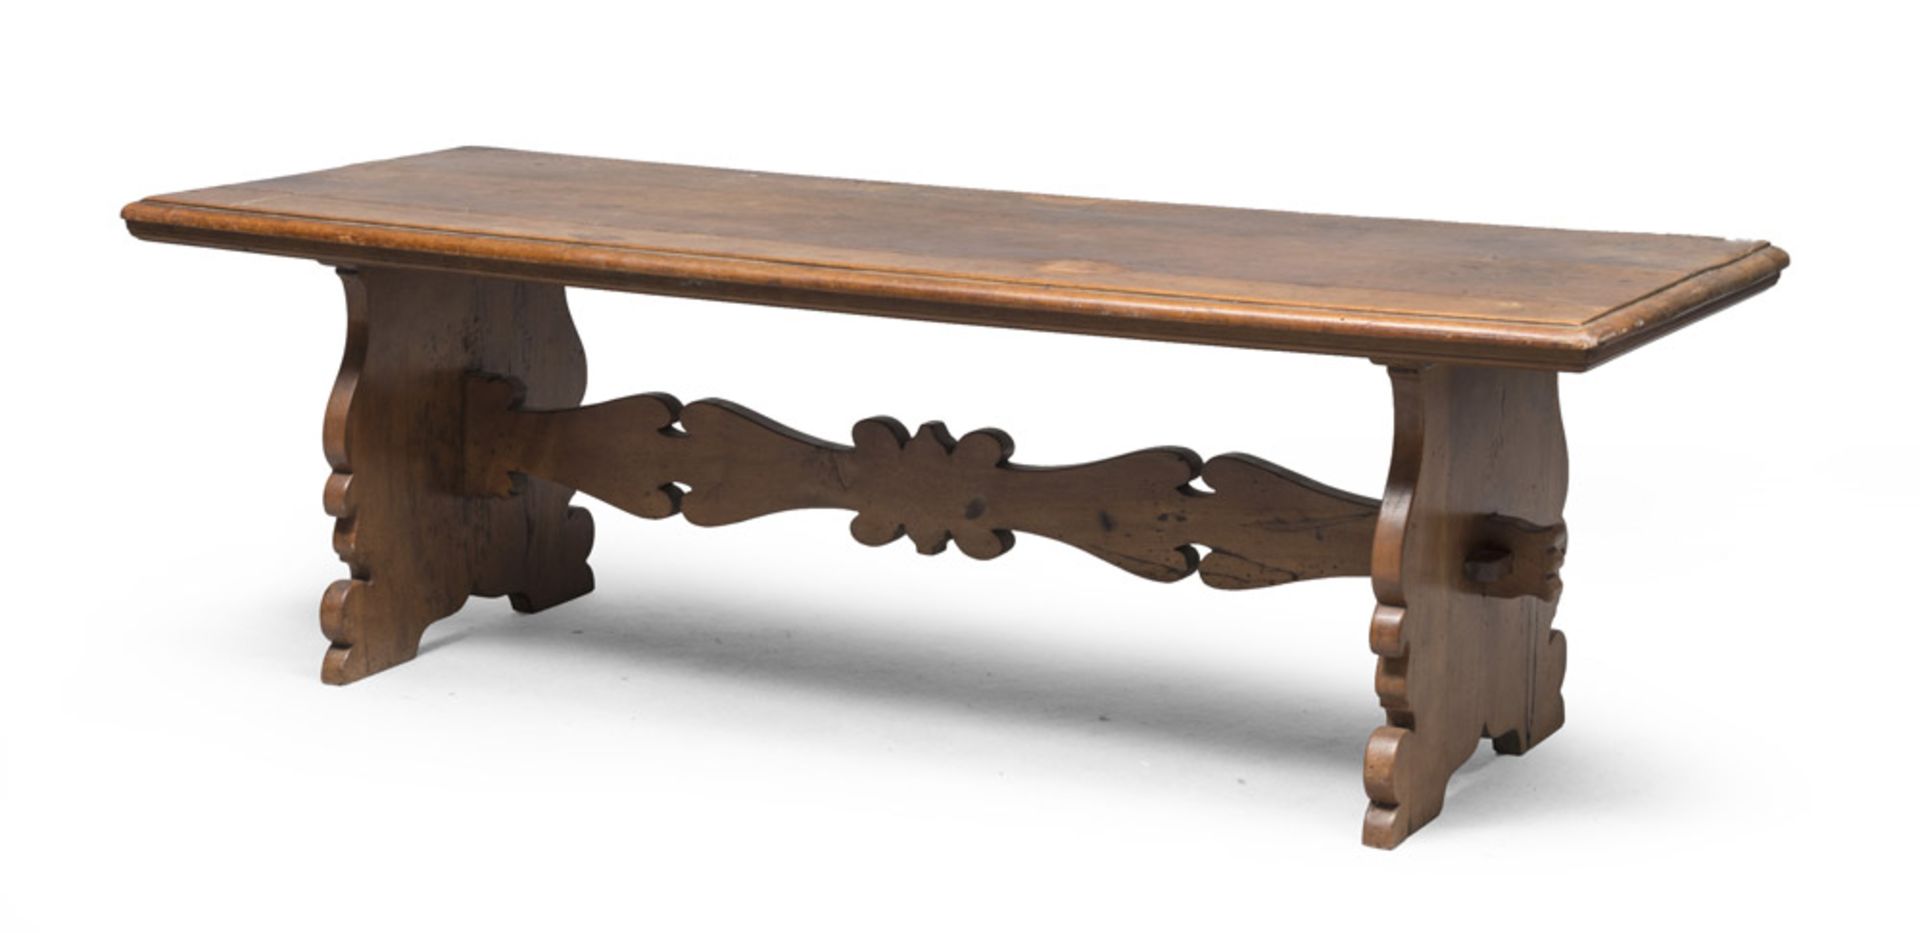 WALNUT LIVING TABLE, ANTIQUE ELEMENTS with lyre uprights. Top of the 18th century. Measures cm. 50 x